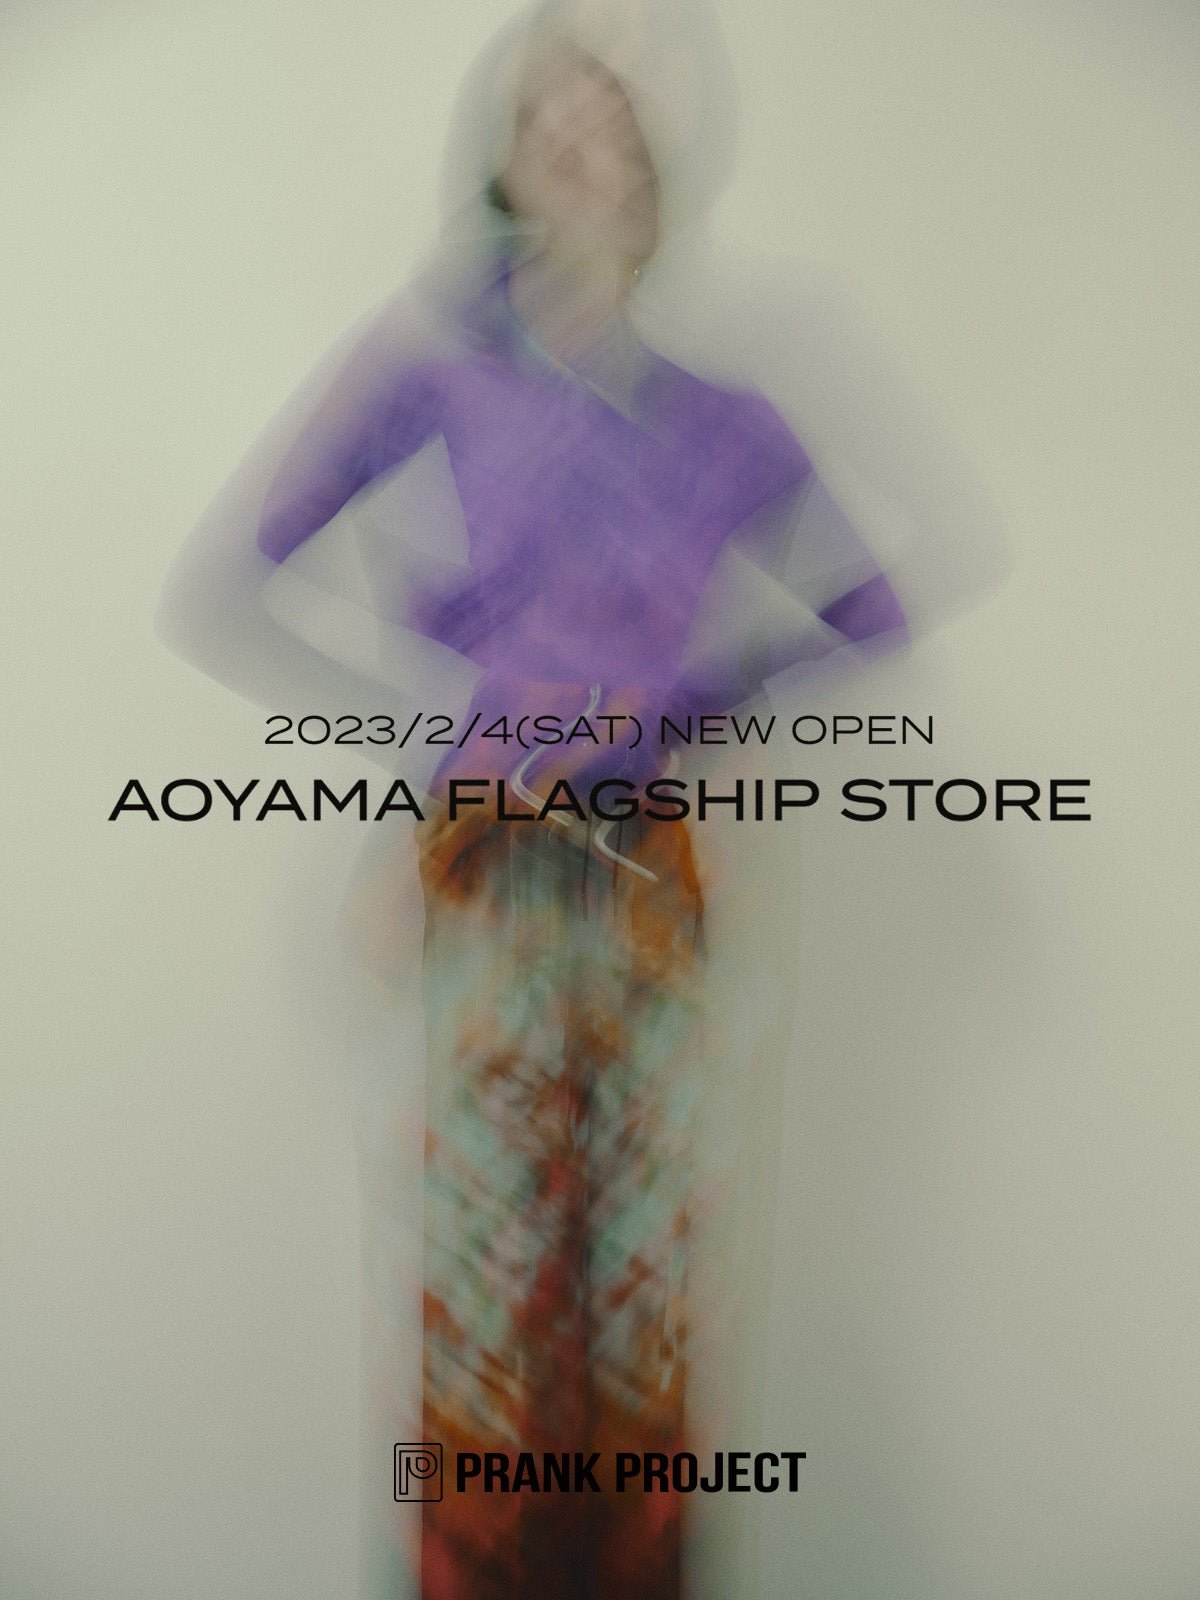 【NEW OPEN】2023/2/4(SAT) AOYAMA FLAGSHIP STORE